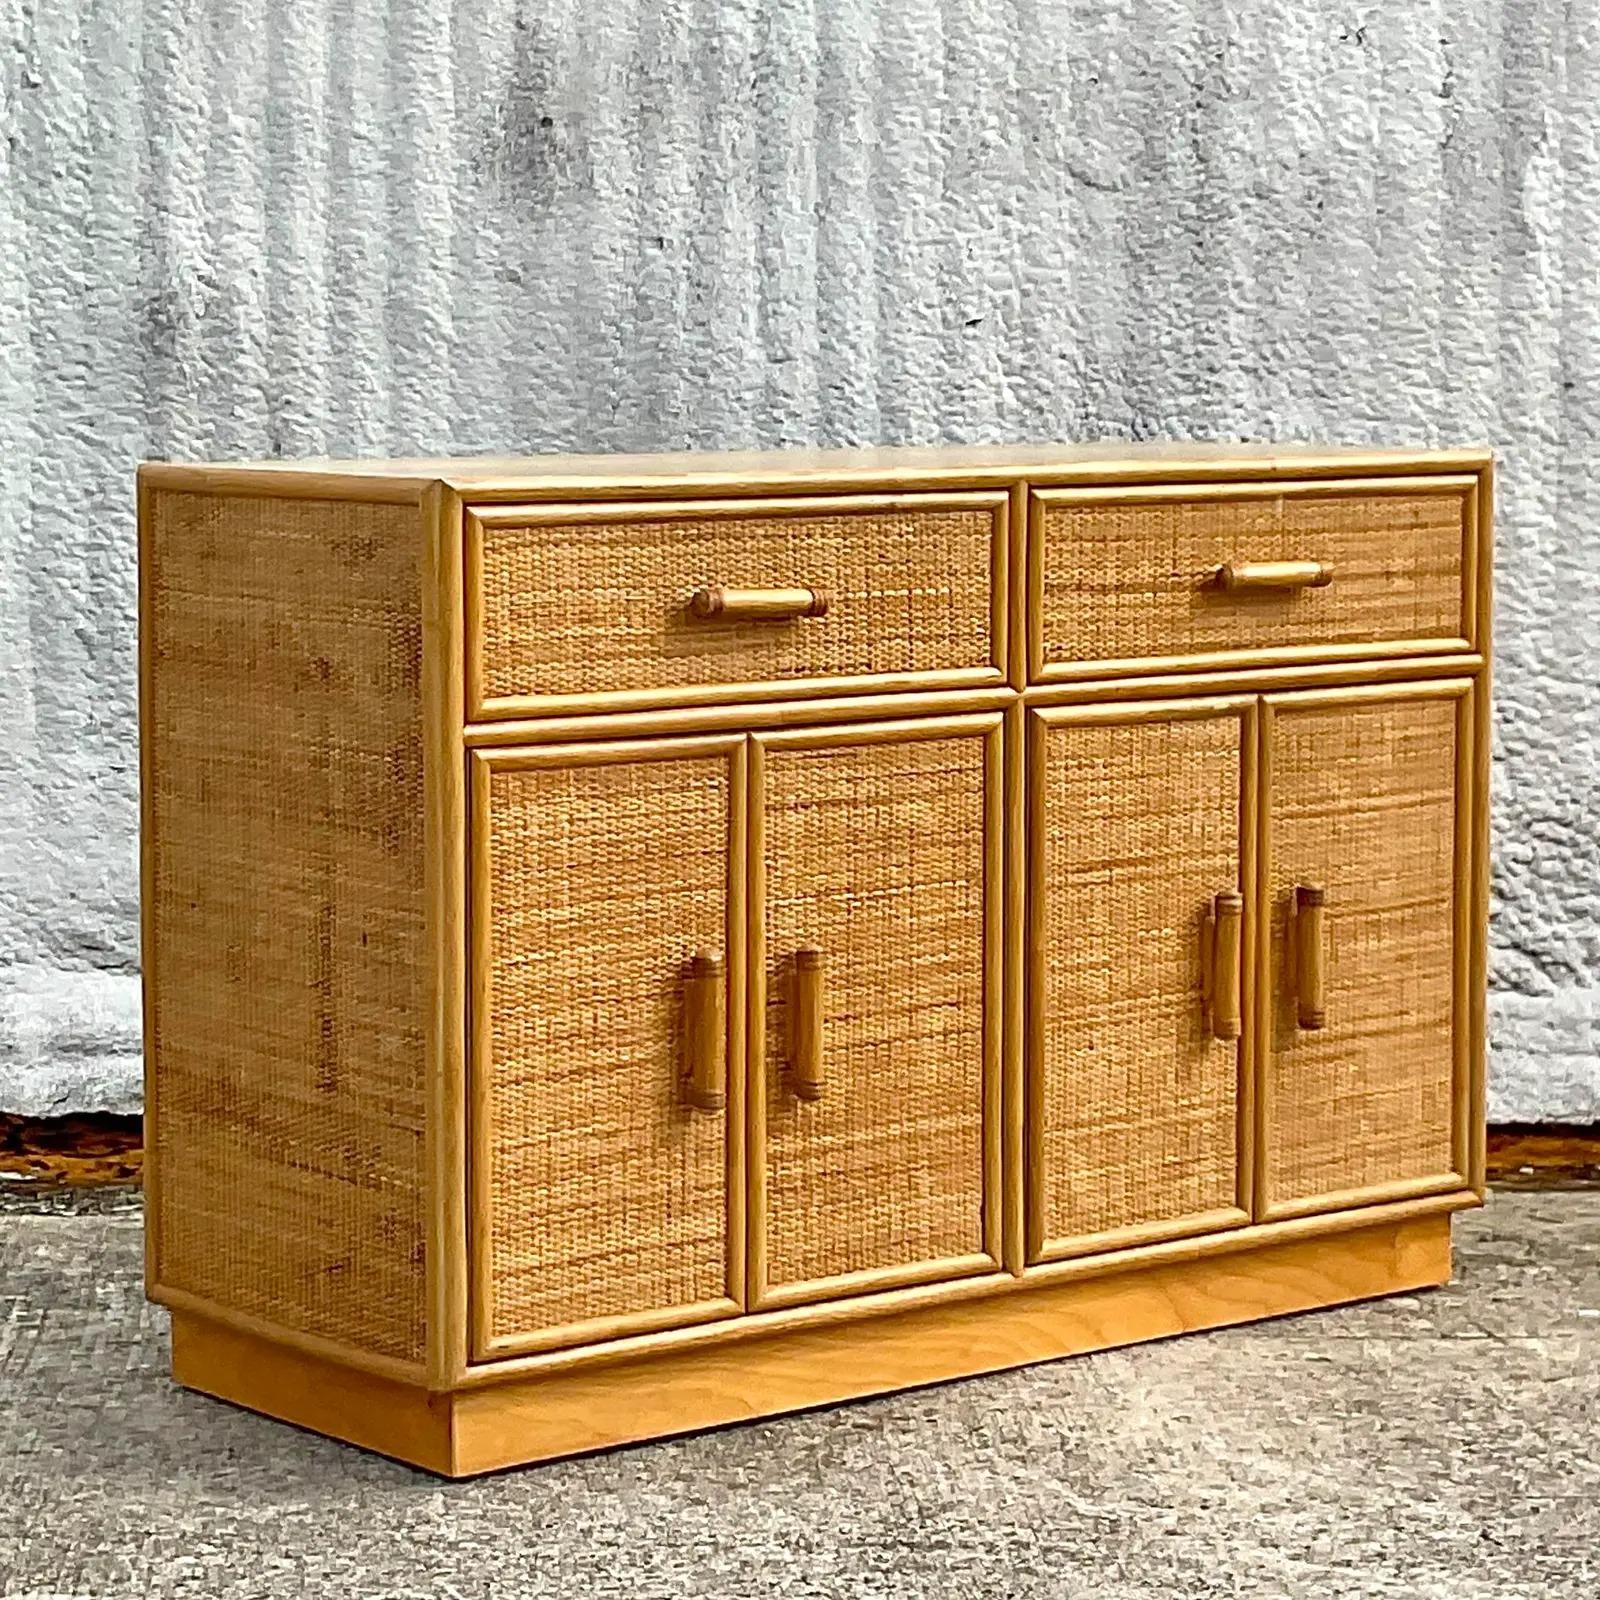 A fabulous vintage Coastal sideboard. A beautiful woven rattan case with lists of great storage below. Laminate faux wood top in great shape. Perfect for a high traffic area or glam it up with a mirrored top or a piece of stone. You decide! Lots of